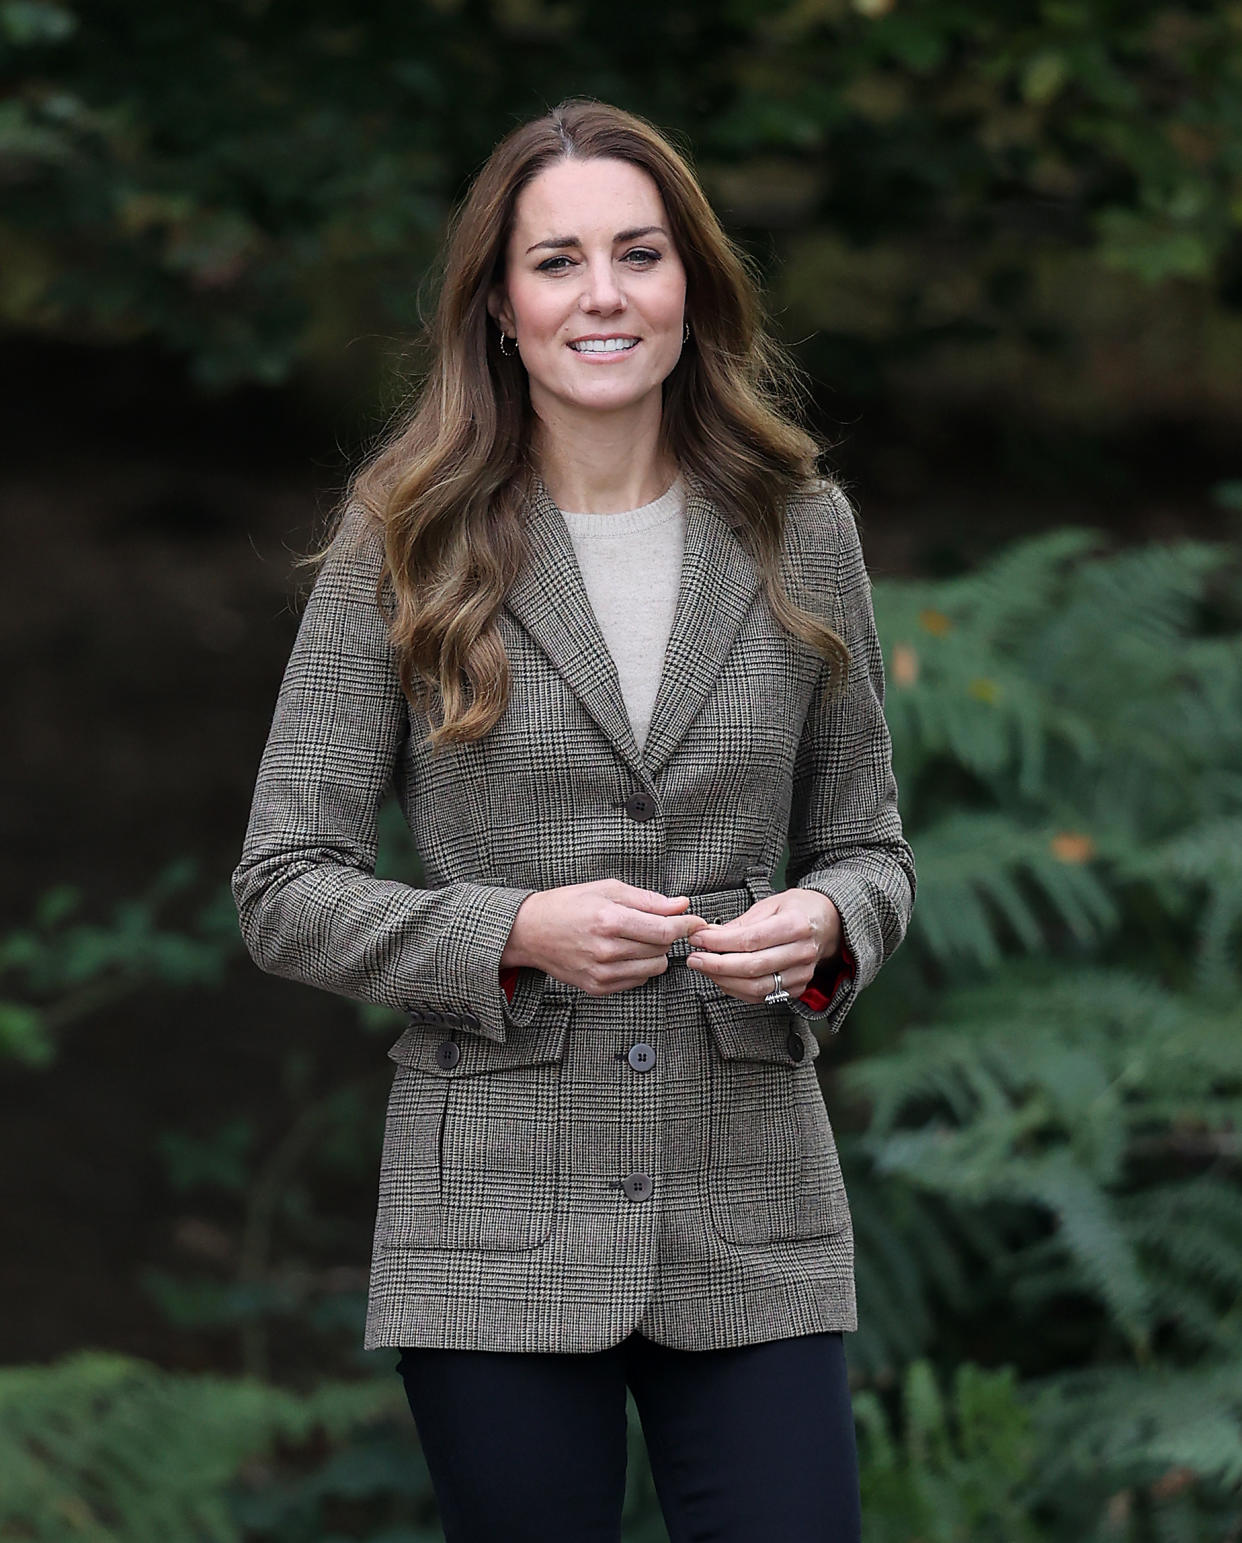 The Duchess of Cambridge wore a tweed blazer by Really Wild on Tuesday 21 September, 2021. (Chris Jackson/Getty Images)